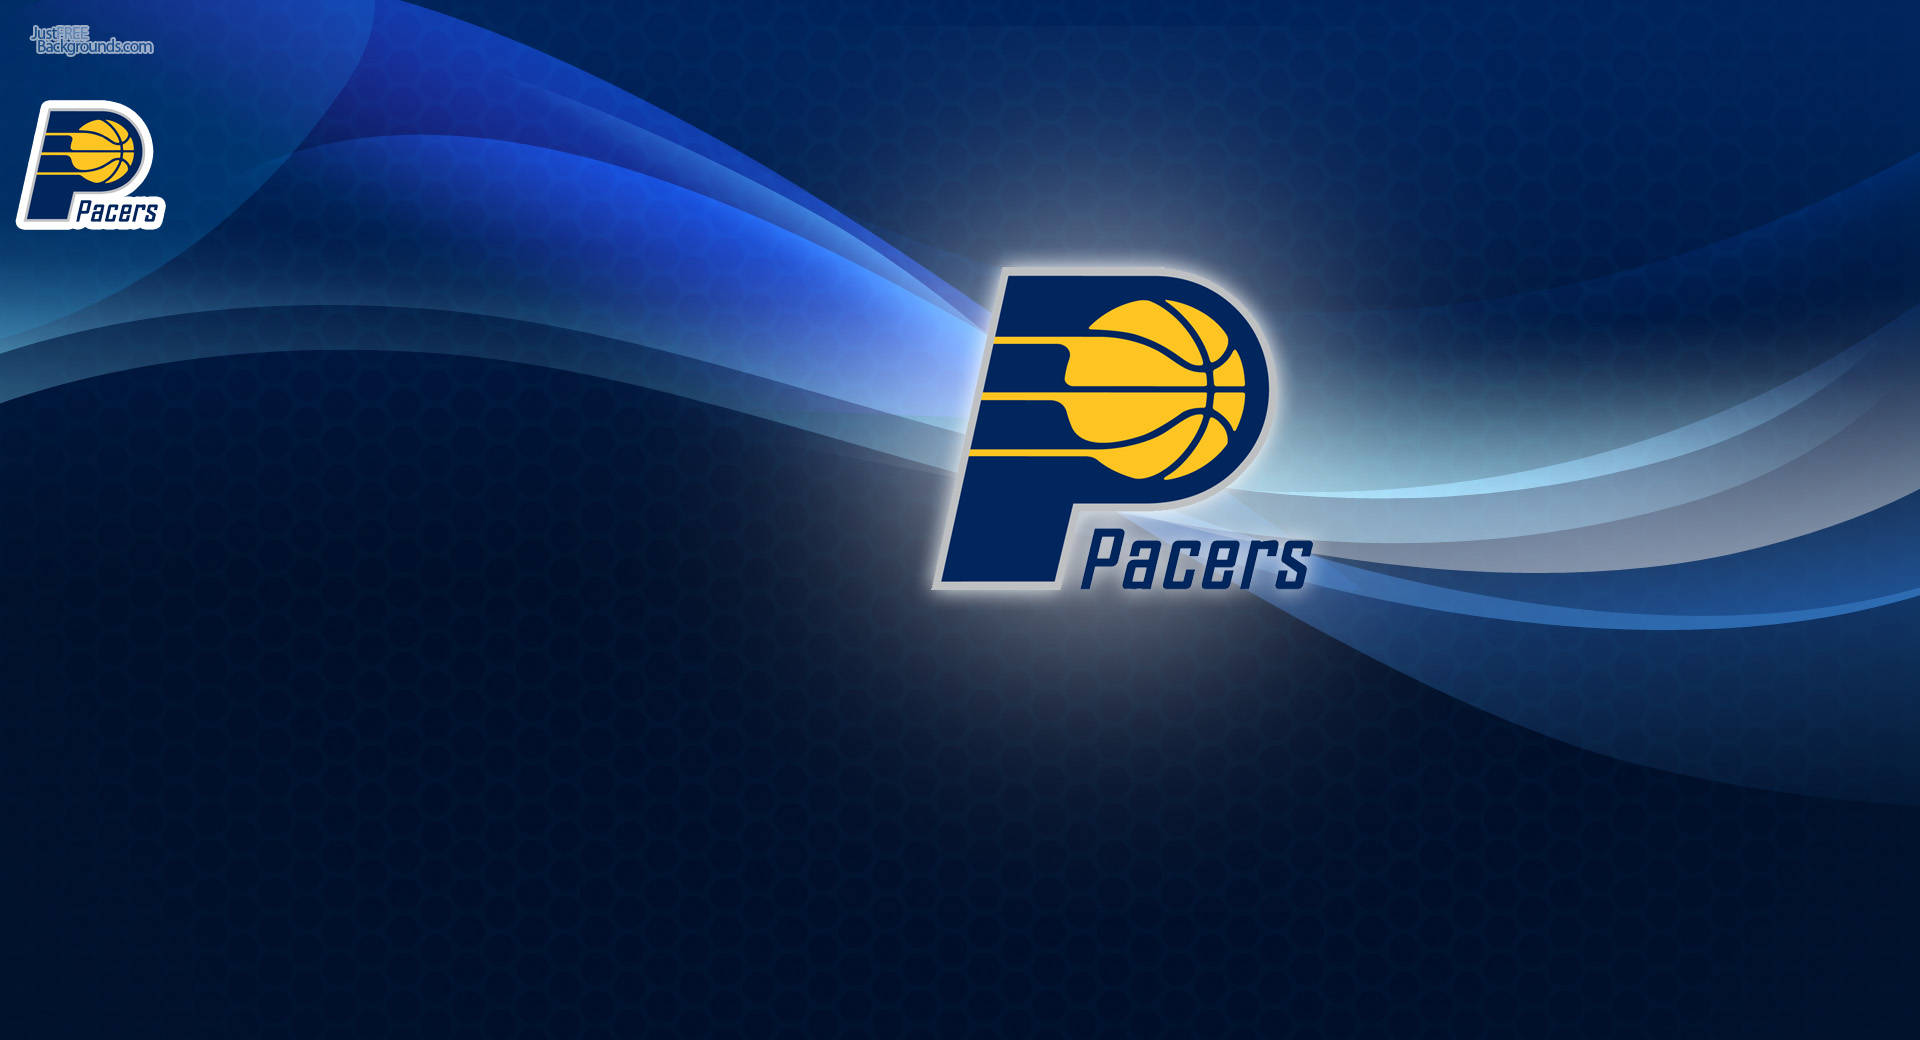 Indiana Pacers Stylized Letter P Logo Background